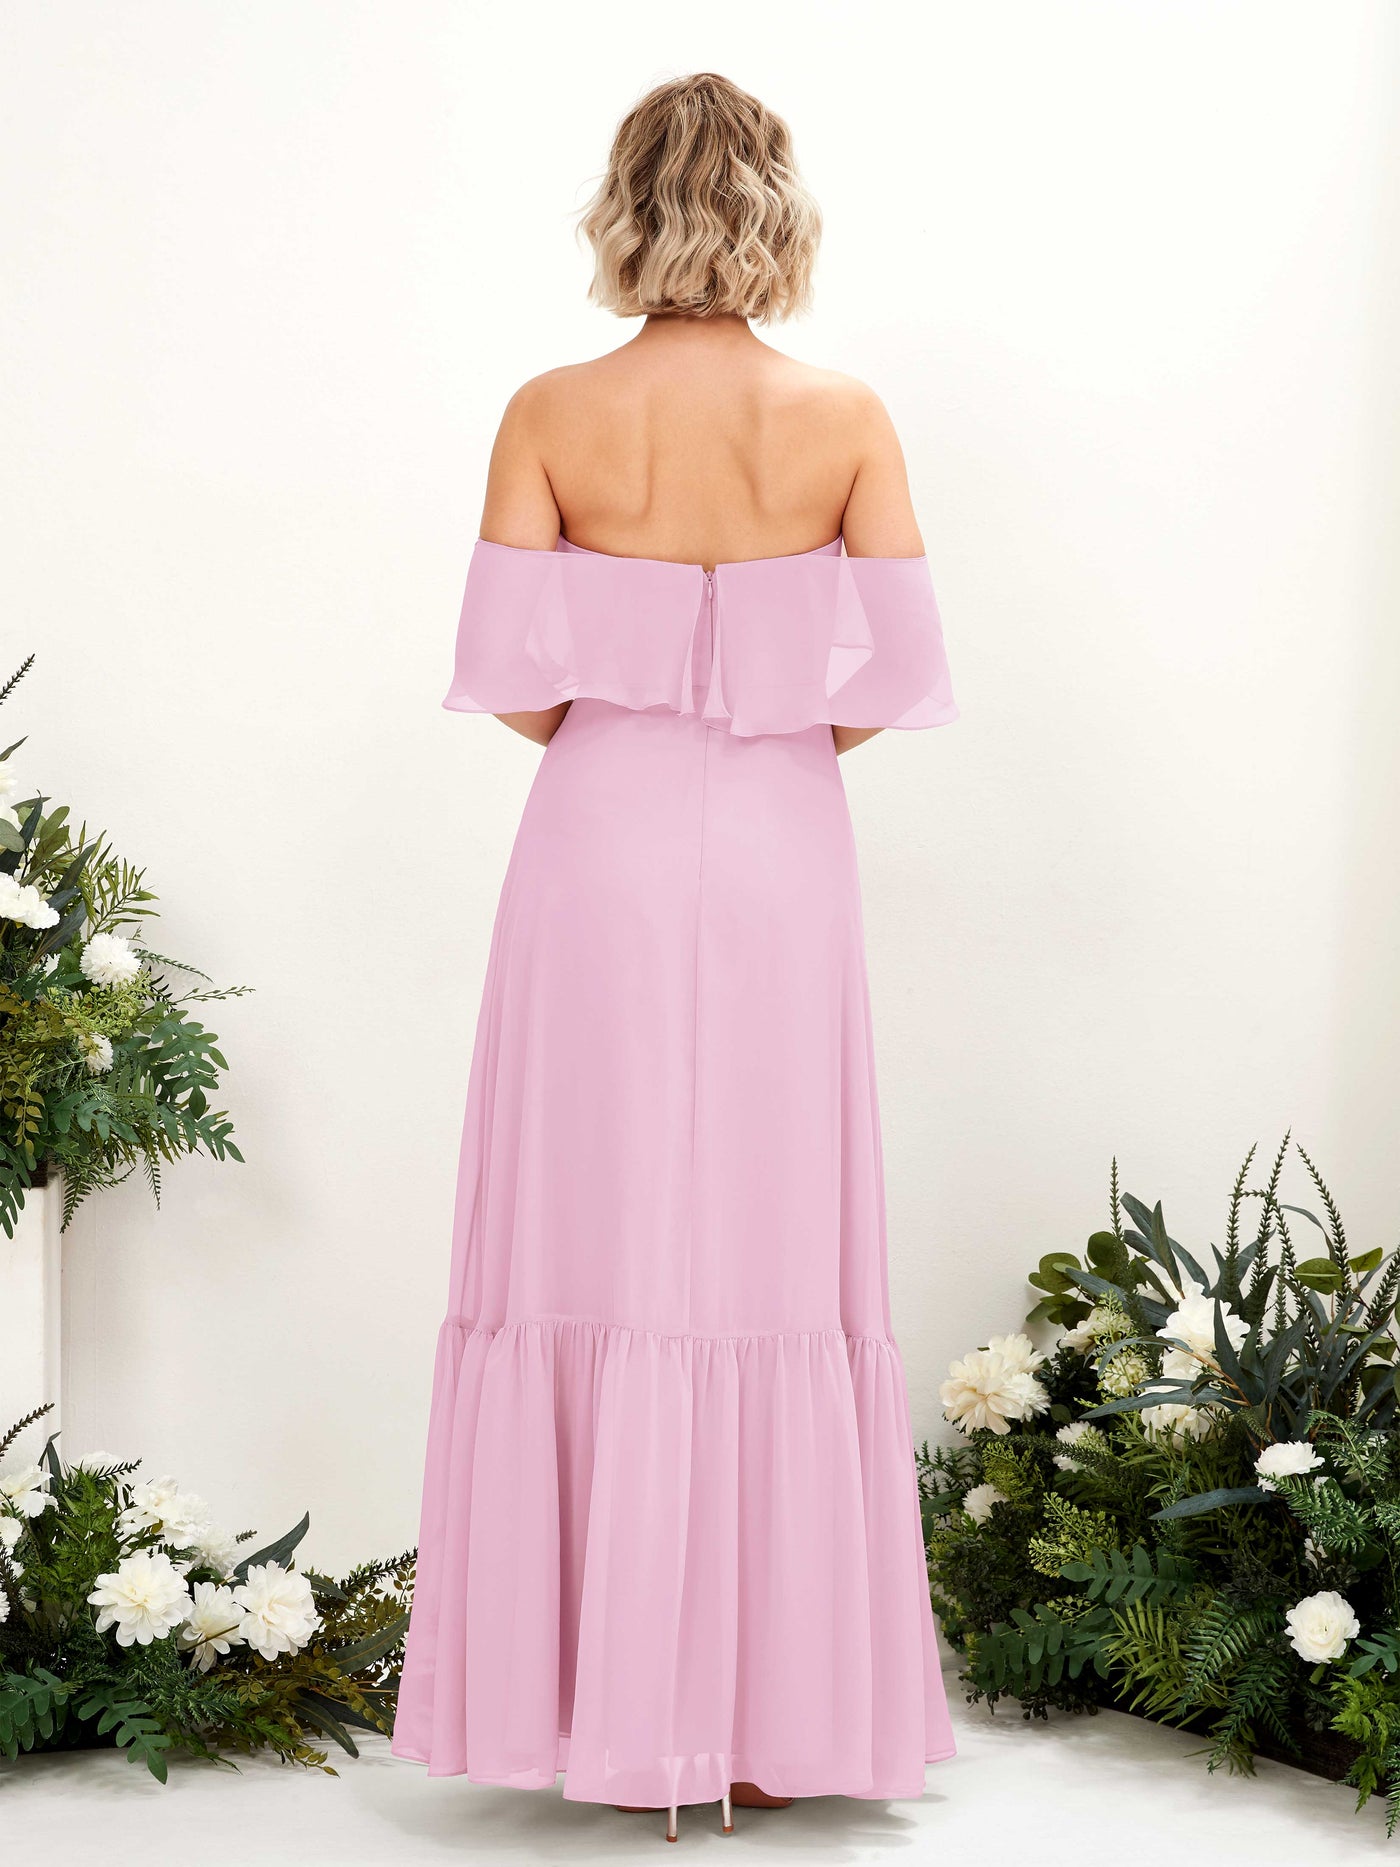 Candy Pink Bridesmaid Dresses Bridesmaid Dress A-line Chiffon Off Shoulder Full Length Sleeveless Wedding Party Dress (81224539)#color_candy-pink